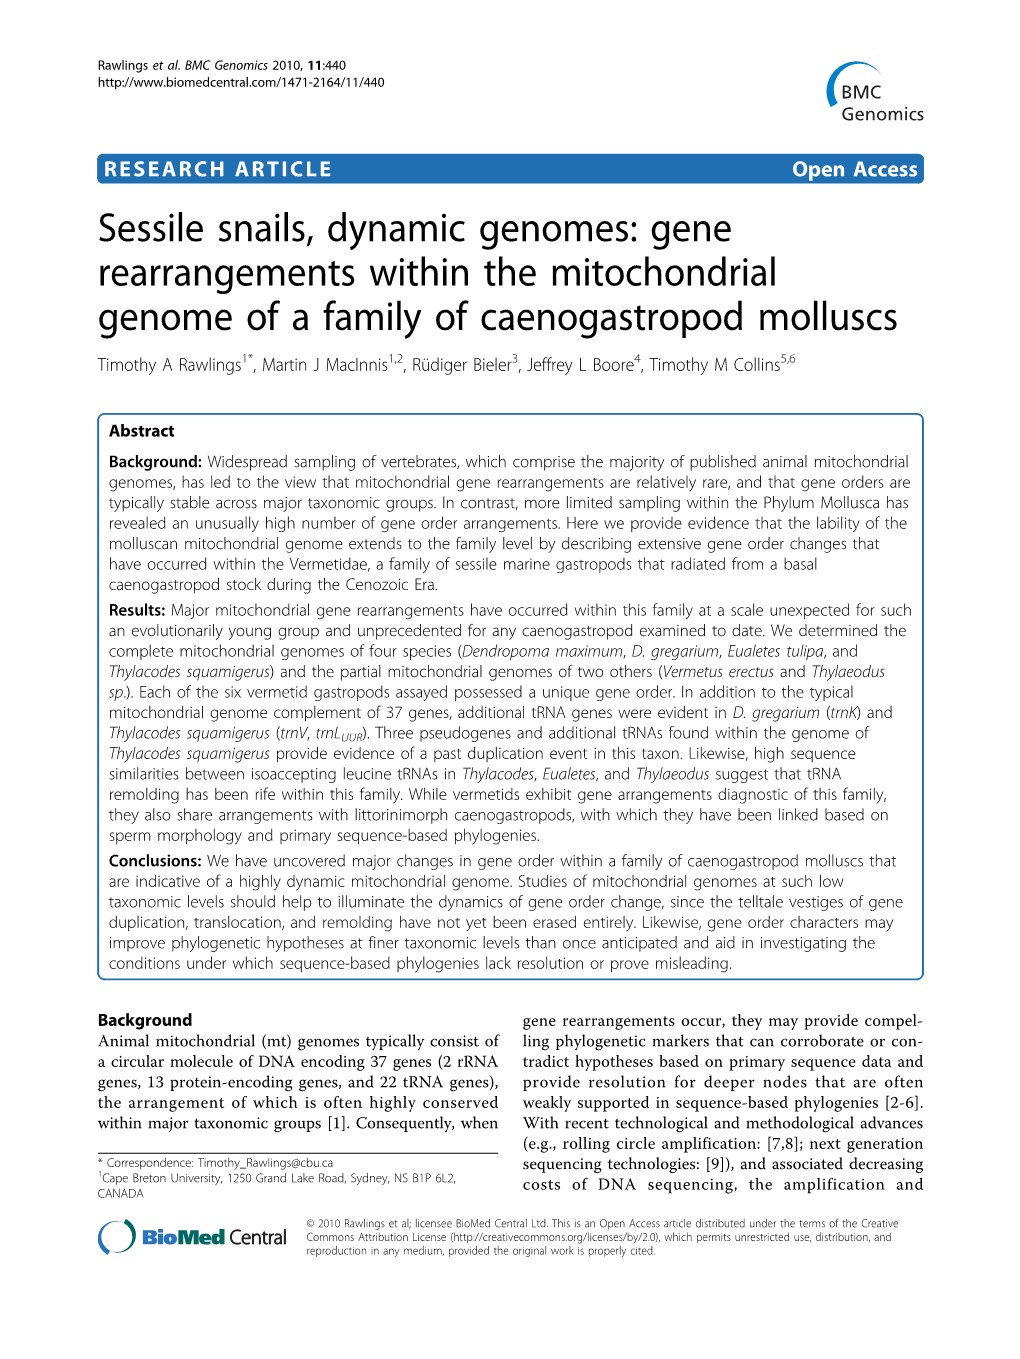 Gene Rearrangements Within the Mitochondrial Genome of a Family of Caenogastropod Molluscs